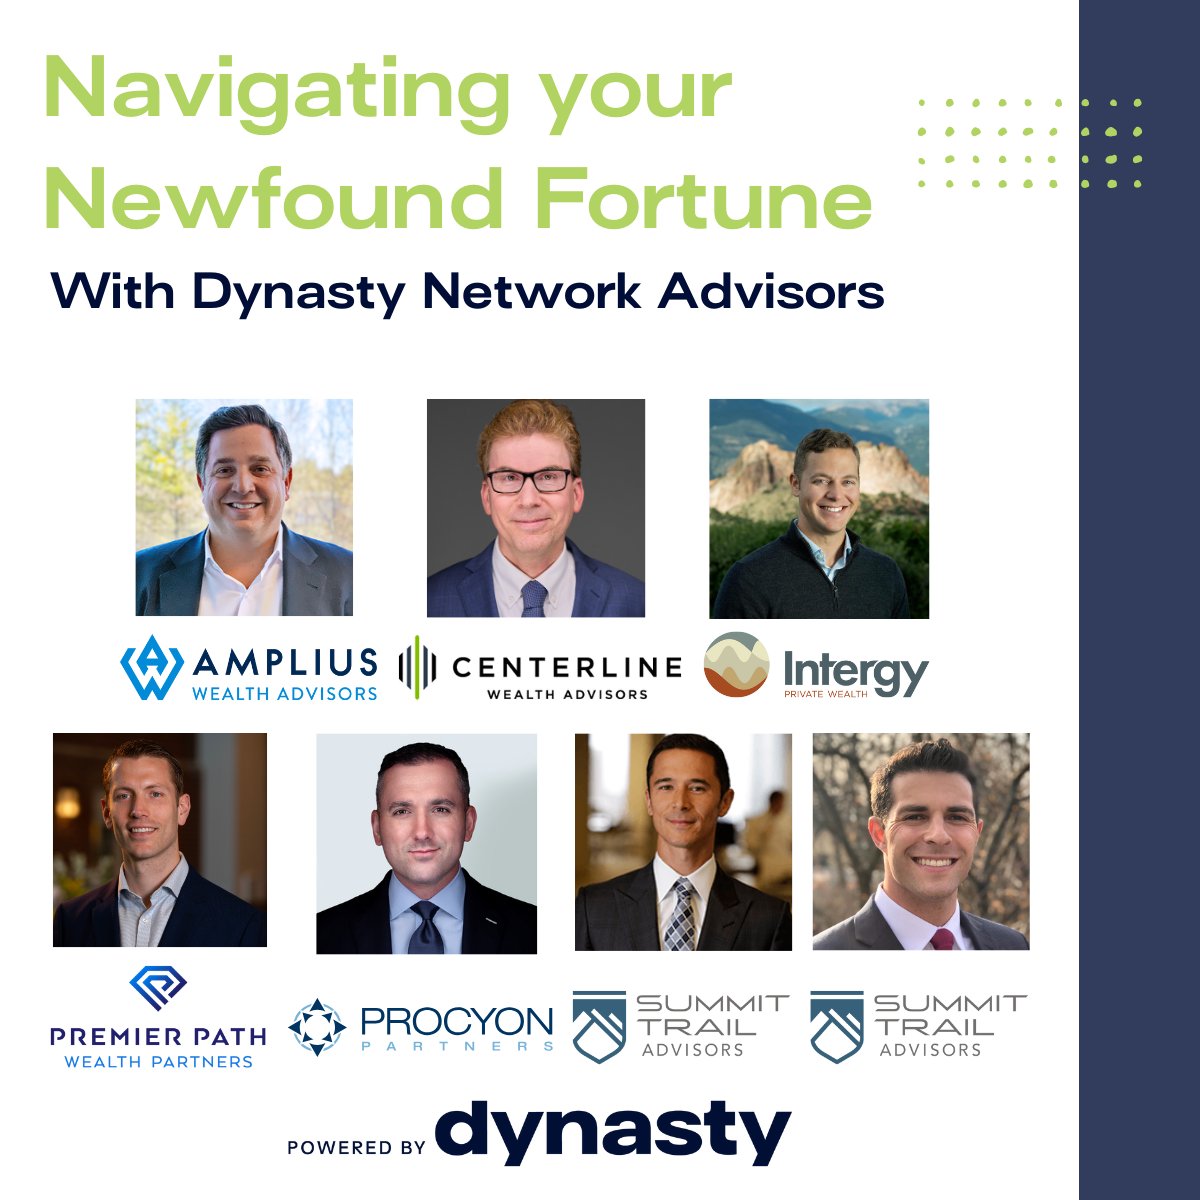 From elation to ruin, read the Rethinking65 article where multiple Dynasty Network Advisors weigh in on managing sudden riches. Learn essential steps to safeguard and maximize newfound fortune. bit.ly/4dx6OPx